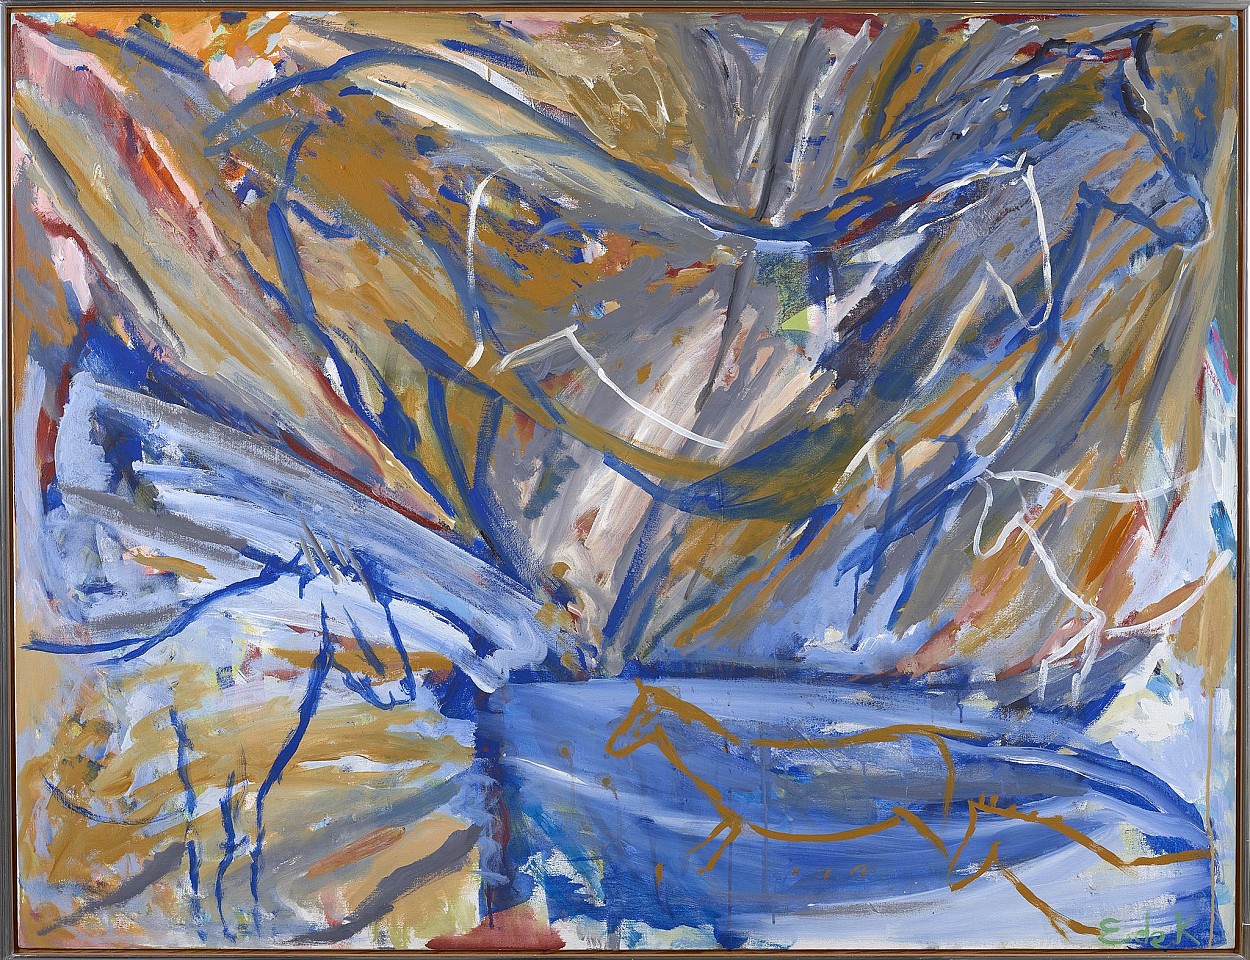 Elaine de Kooning, Six Horses: Blue Wall | SOLD, 1987
Acrylic on canvas, 46 x 60 in.
Susan Vecsey on Elaine de Kooning: I love how this painting reveals itself more and more as you spend time with it.  There are images within images, stillness and movement.  And the image is so contained, horses and fragments of horses pushing against the edges of the painting.